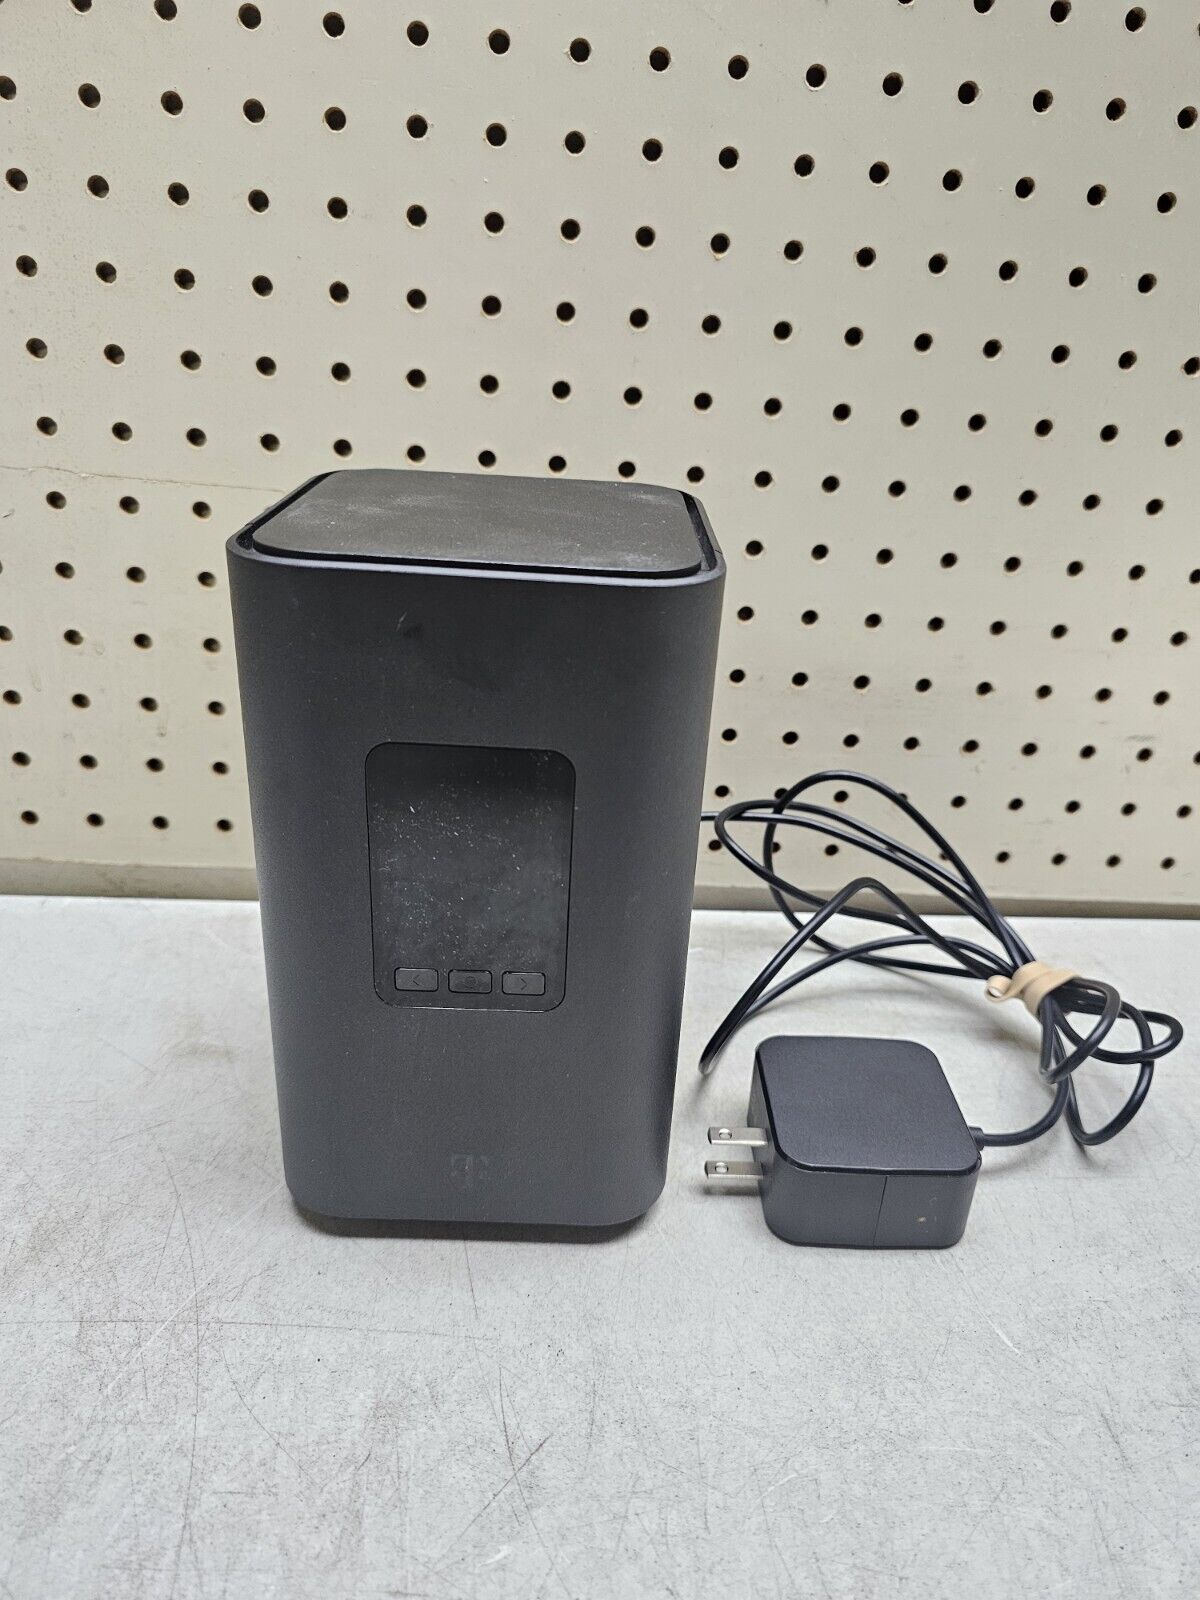 T-Mobile 5G Gateway Wi-Fi Internet Router Model: KVD21 Tested and Works